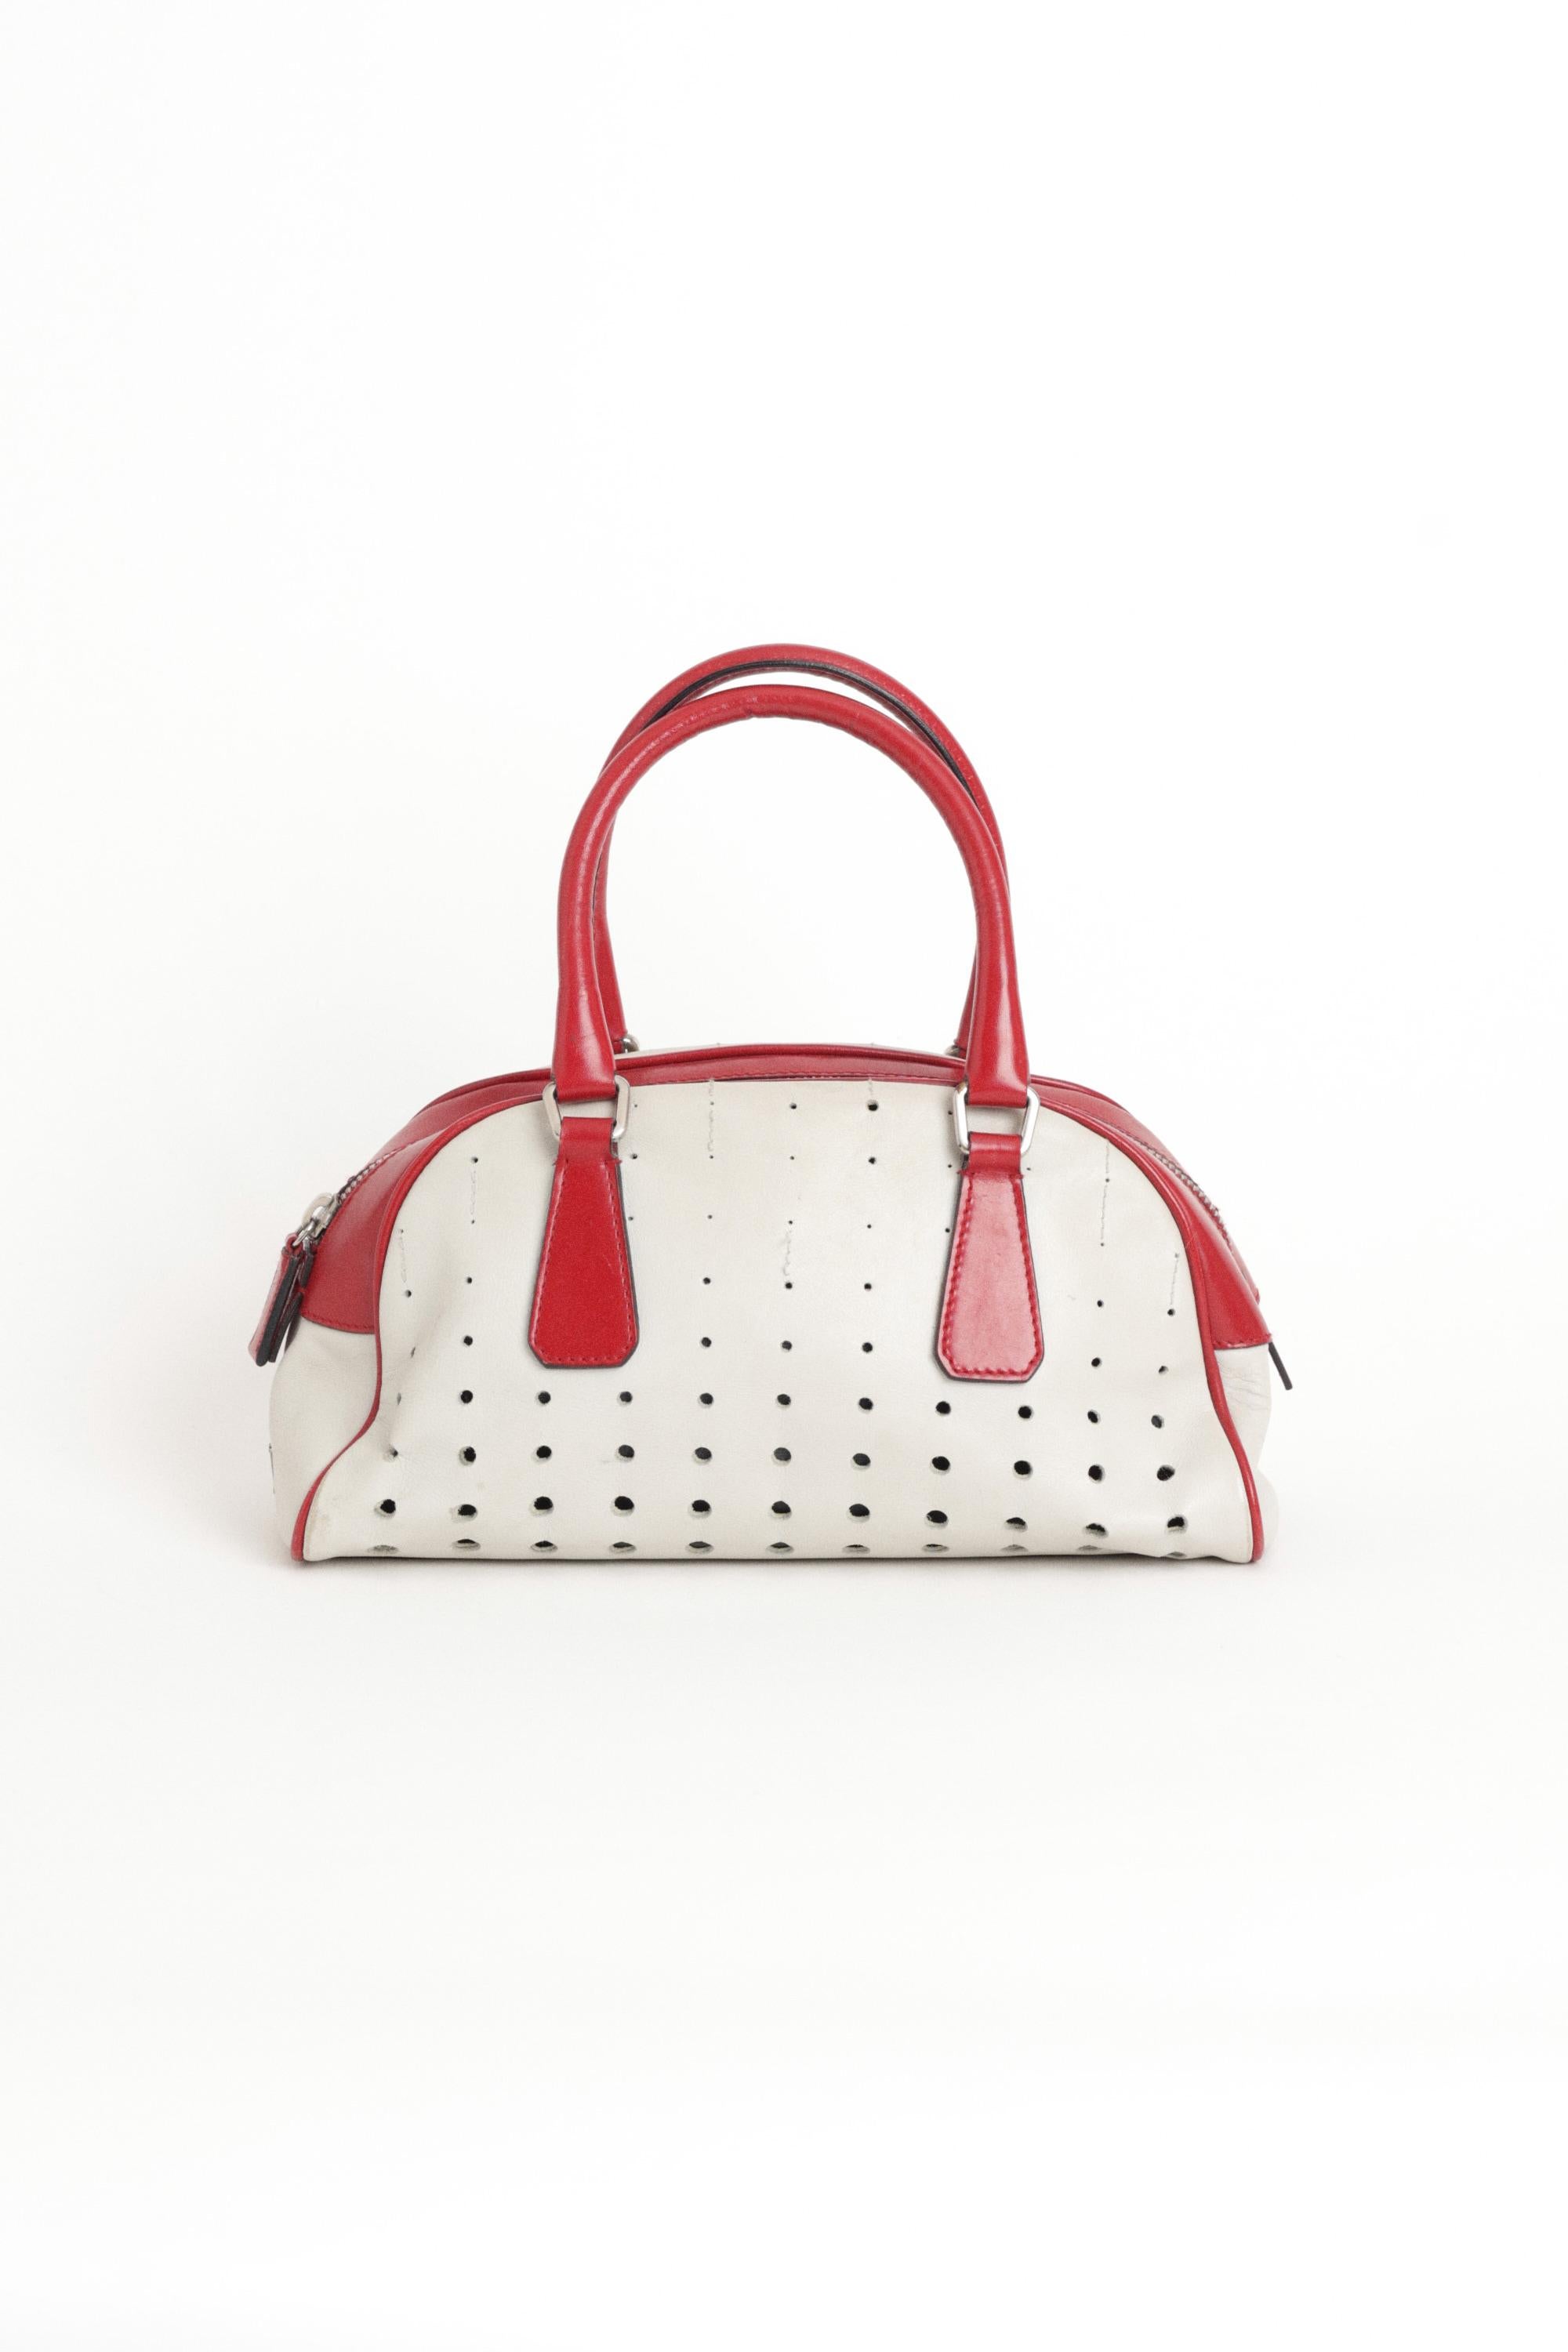 We are excited to present this Prada 2000’s collectible red and white bowling bag. Features perforated design, interior zipped pocket and zip closure. In good vintage condition, the lining is coming away from the inside. Has been named one of the